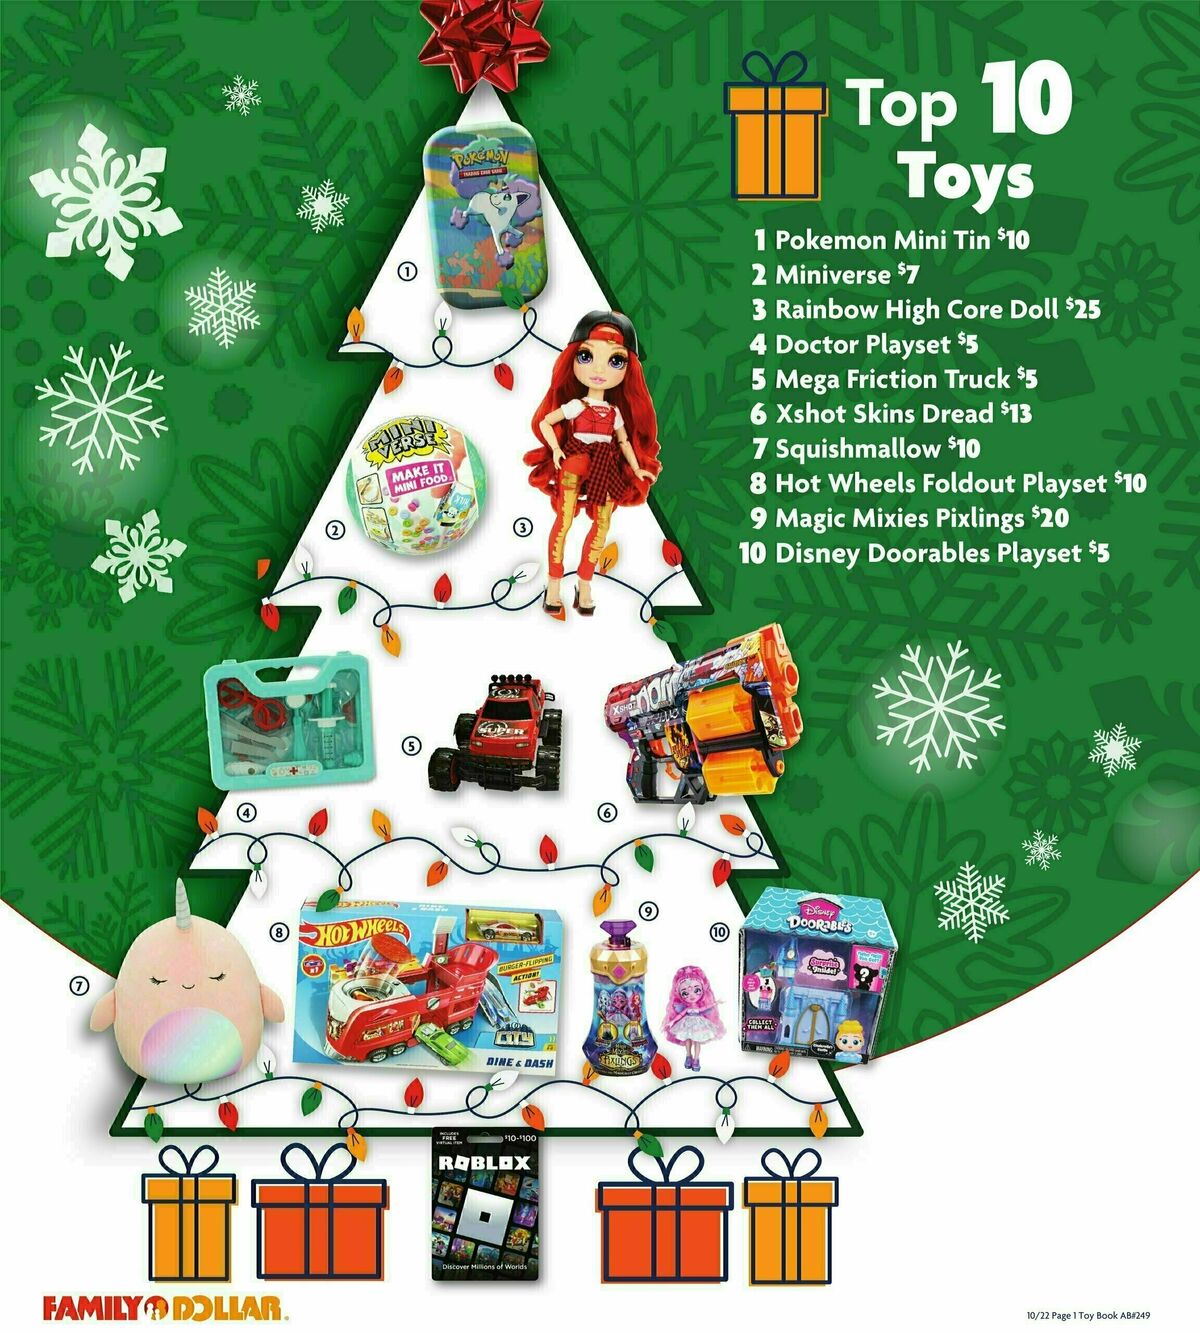 Family Dollar Holiday Toy Guide Weekly Ad from October 22